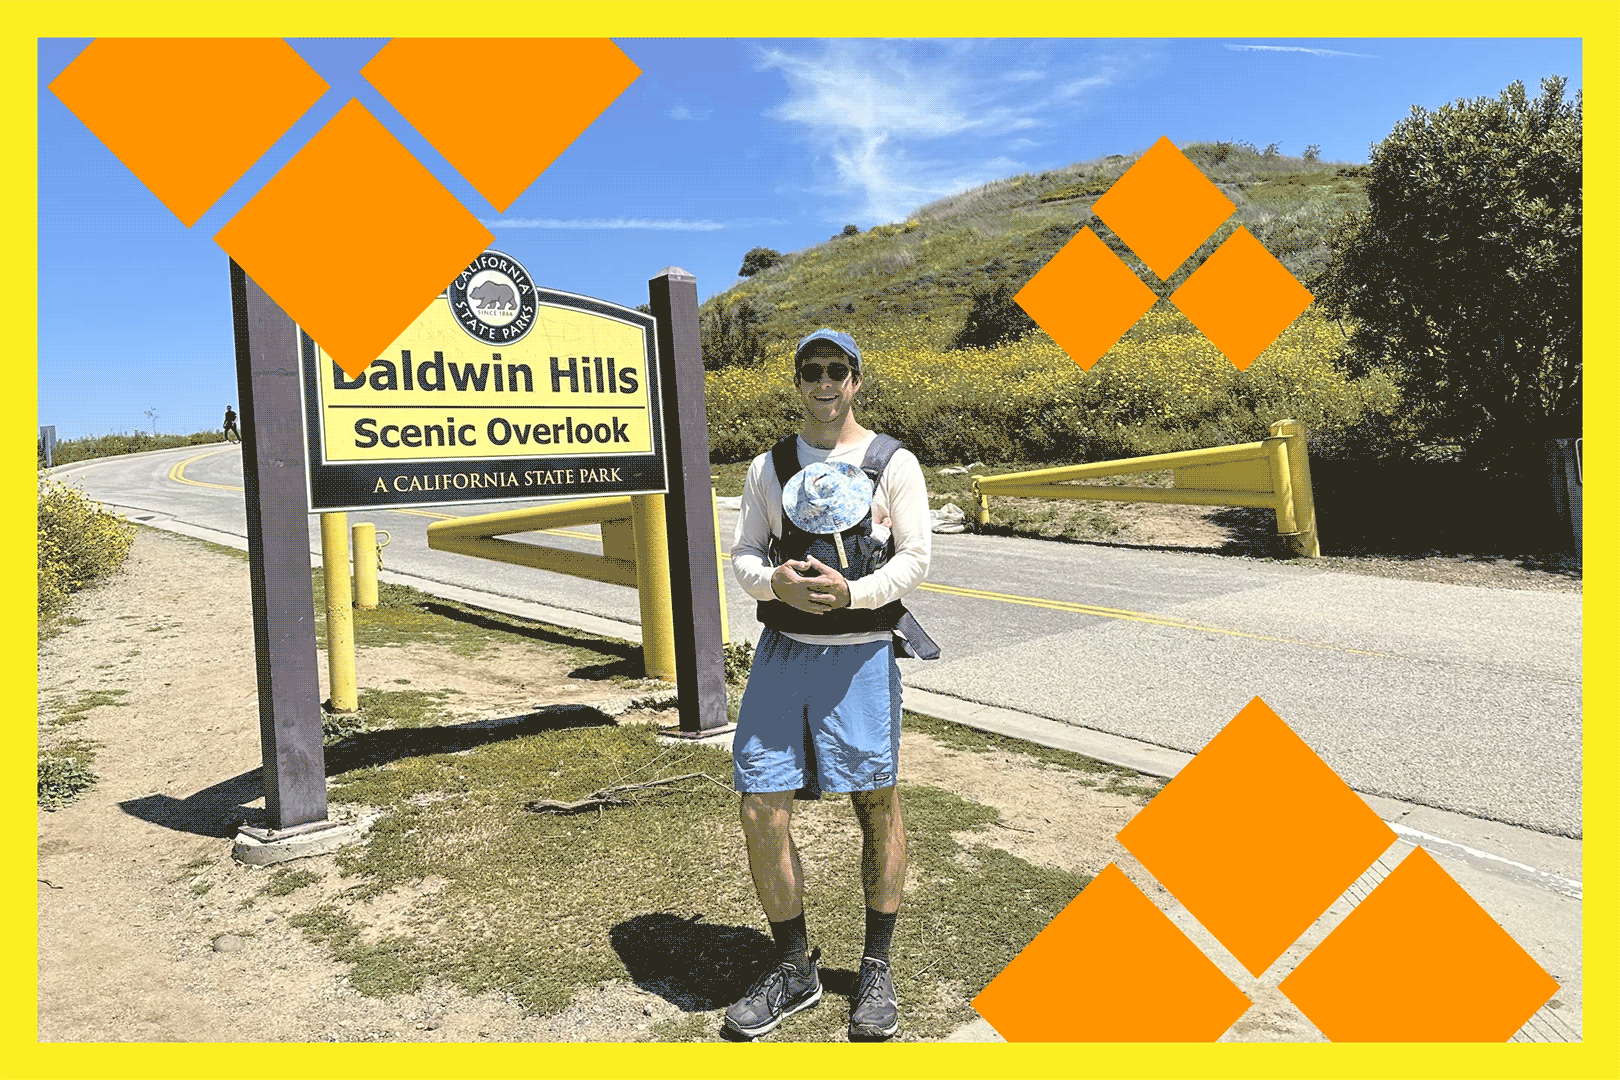 A man holding a newborn at the trailhead for a hike